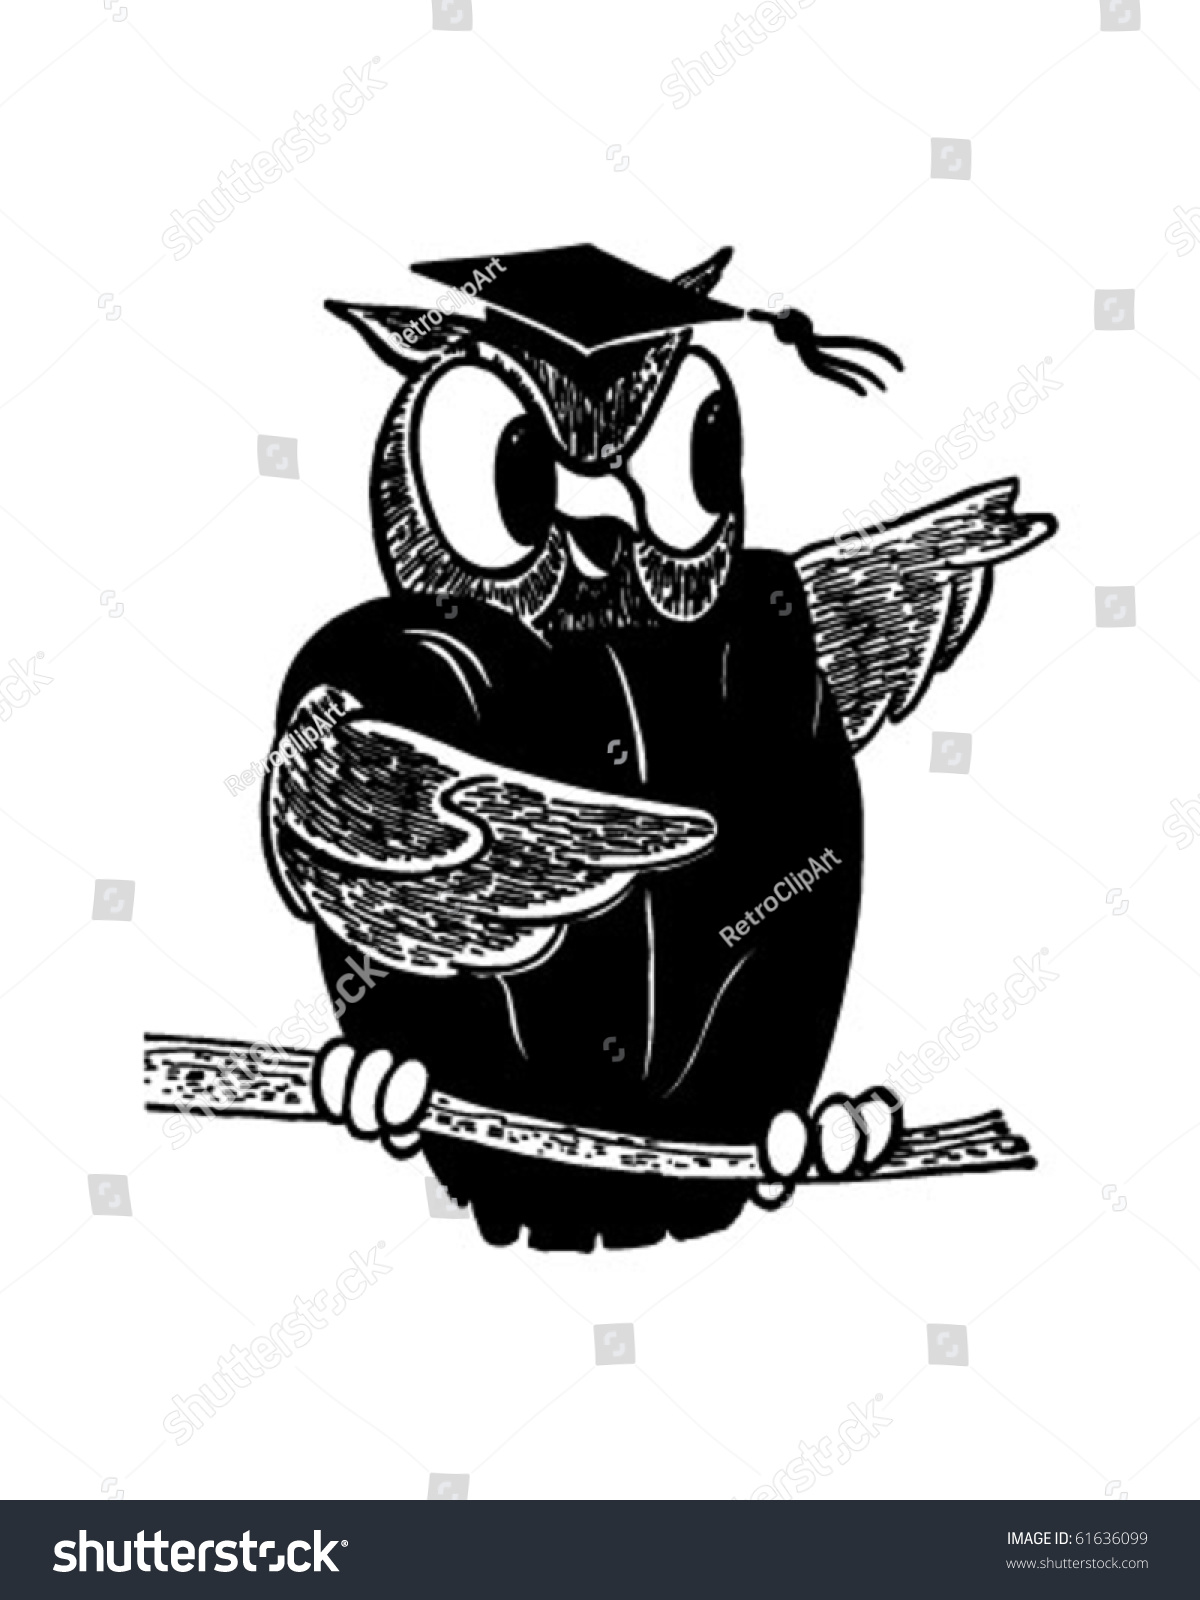 clipart wise old owl - photo #38